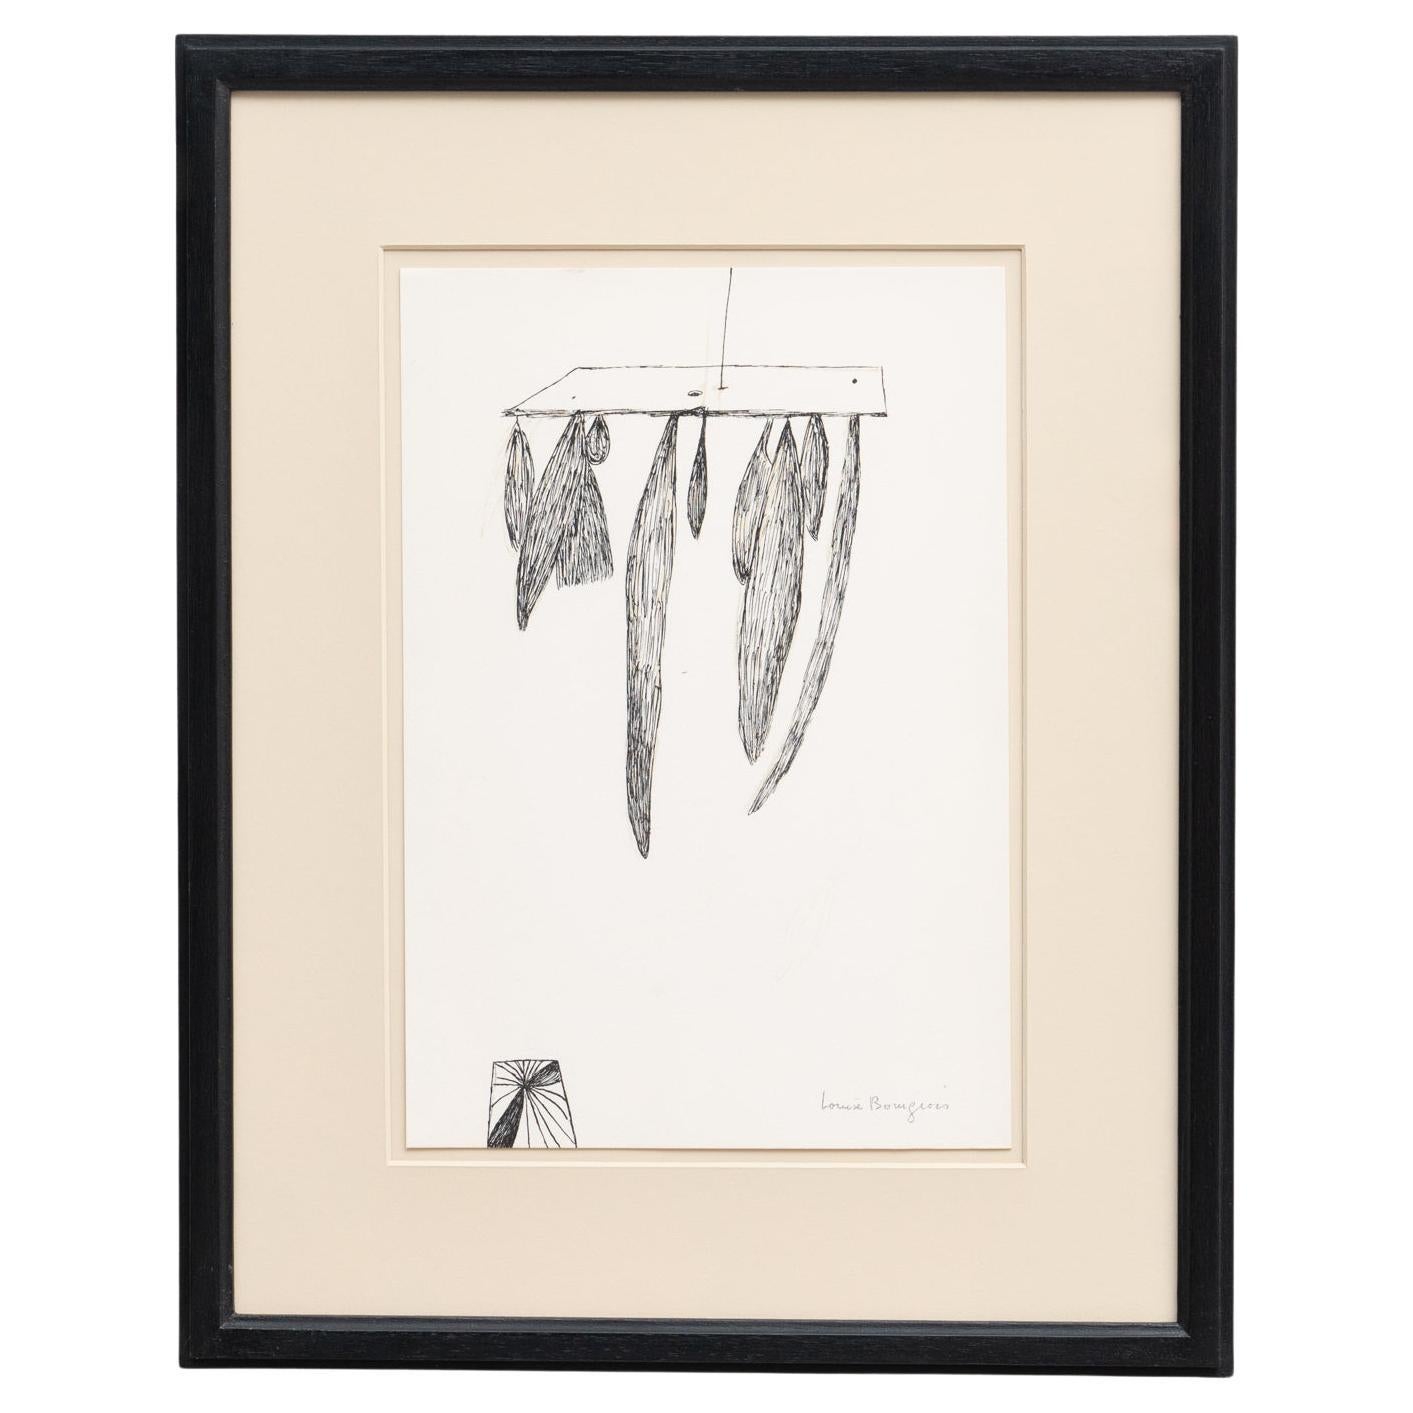 Louise Bourgeois 'Sheaves' Lithography, 1985 For Sale